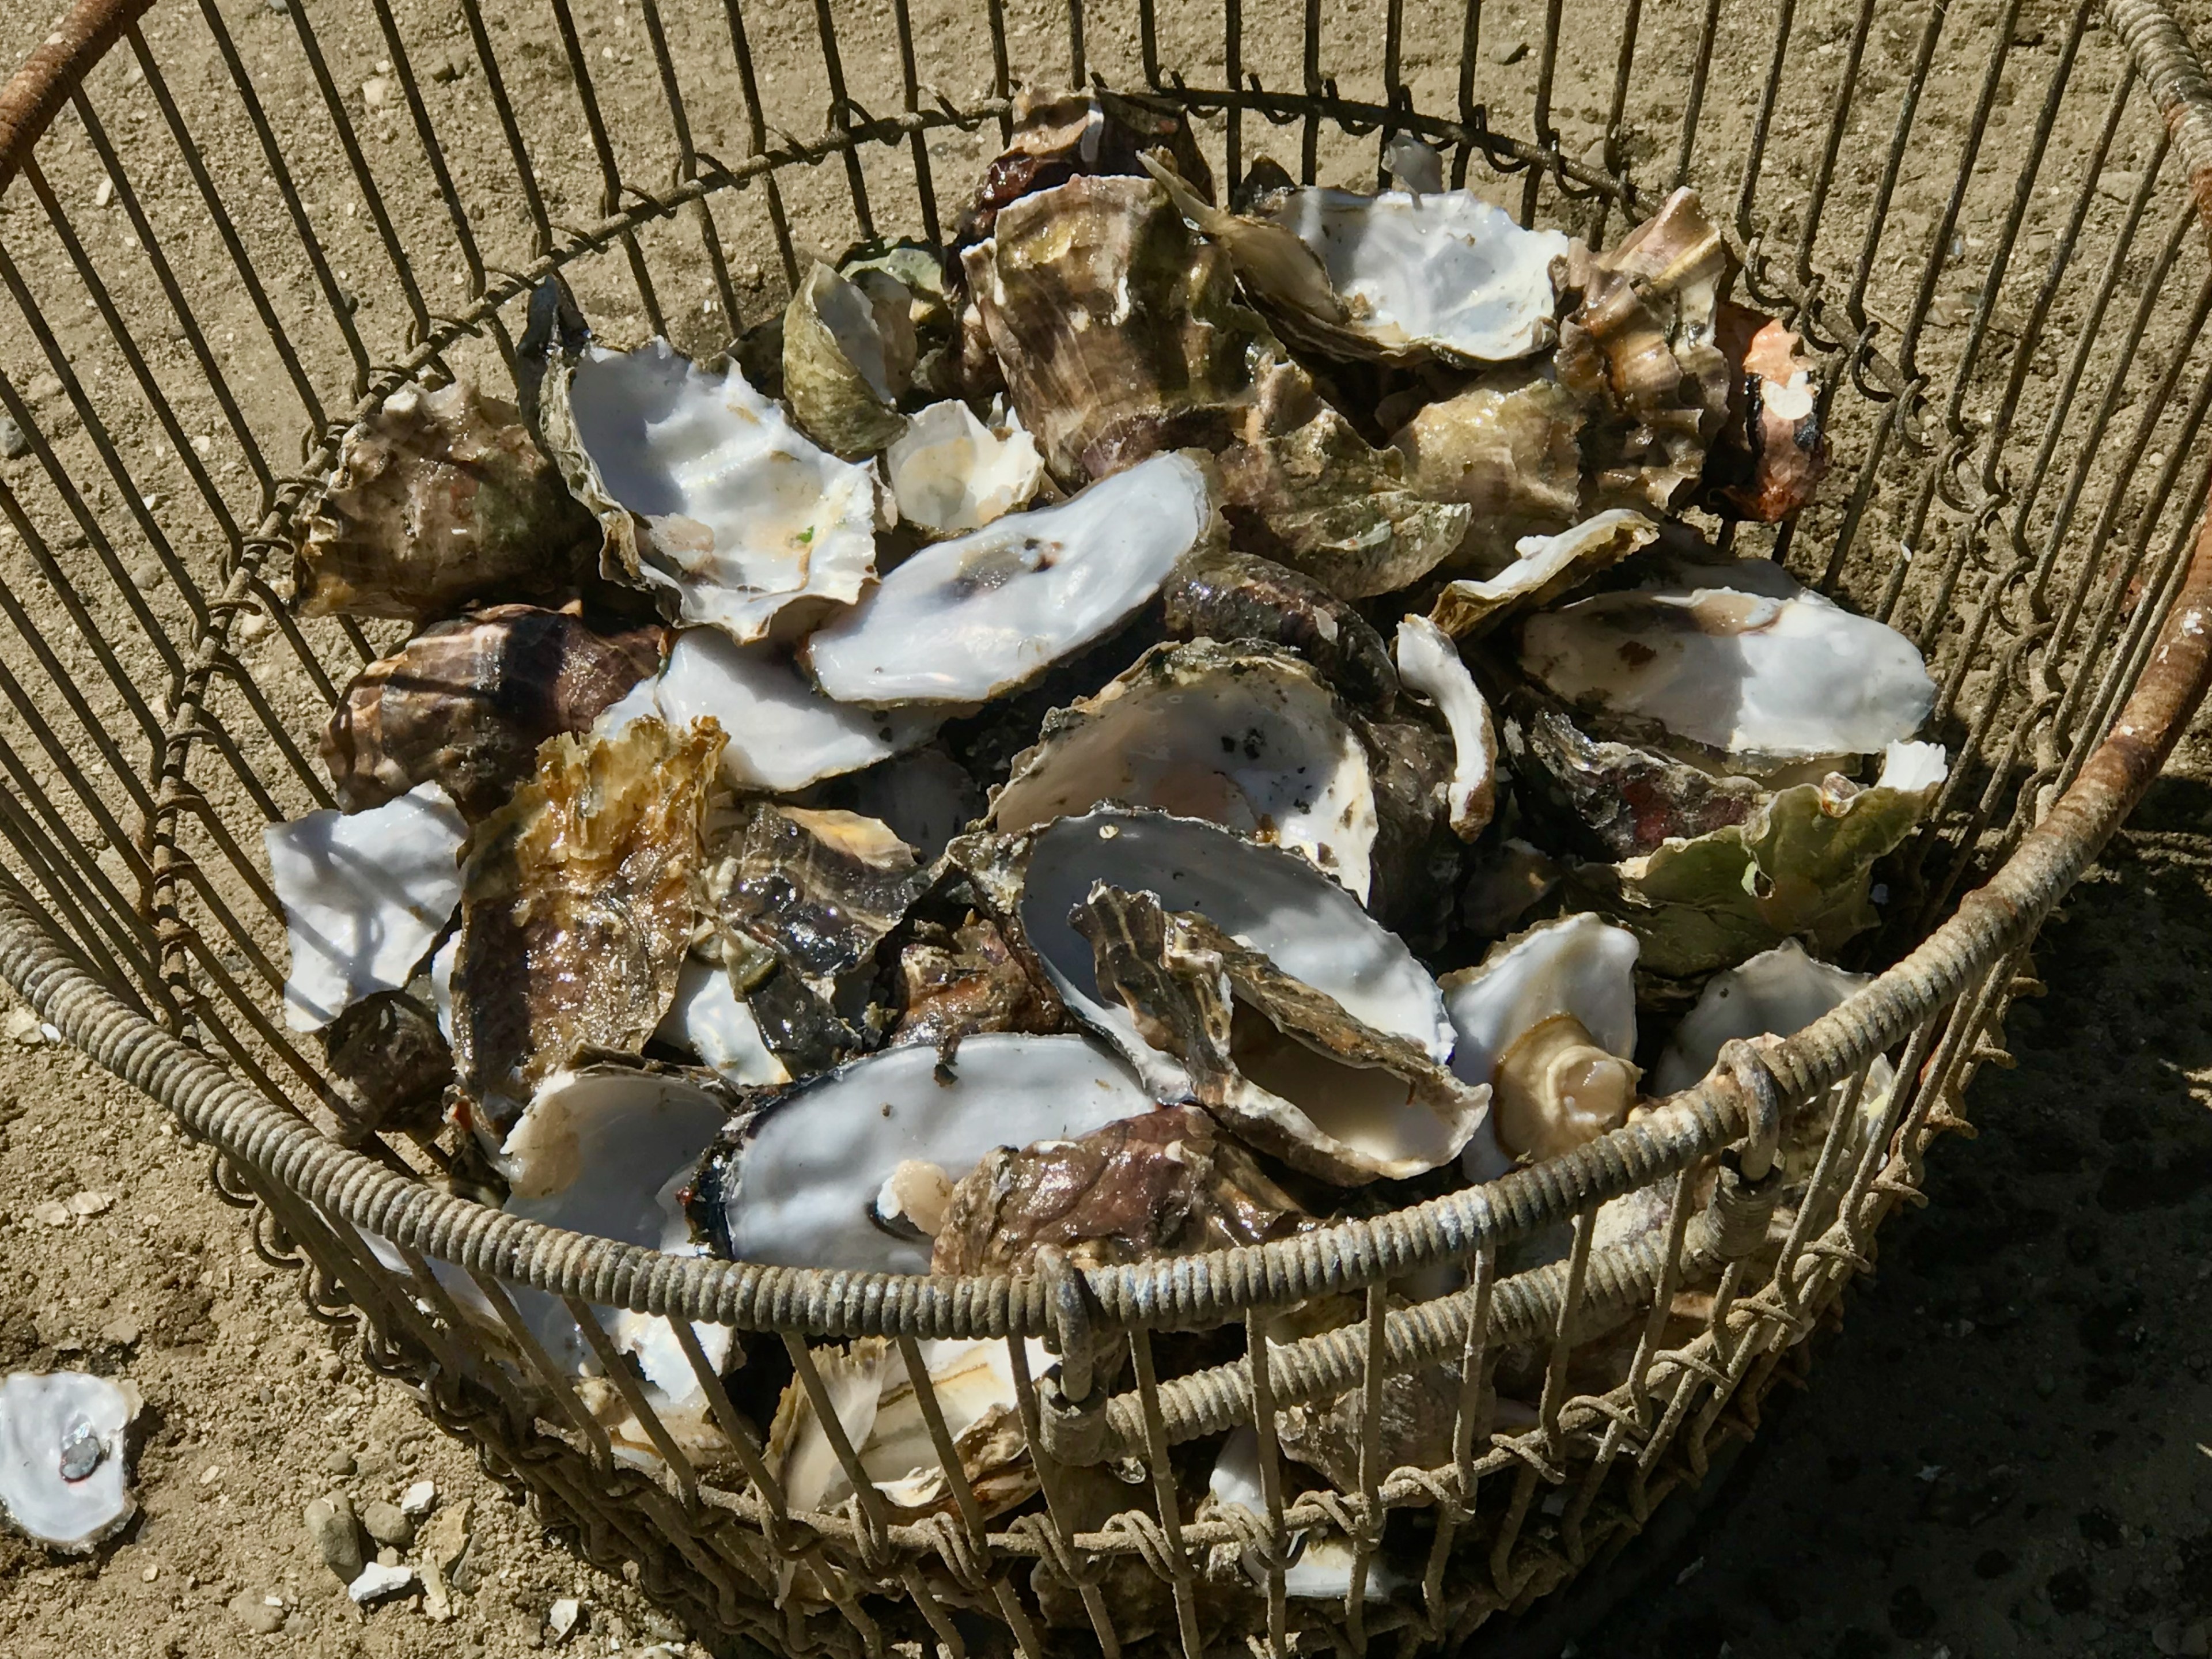 A basket filled with oyster shells. 